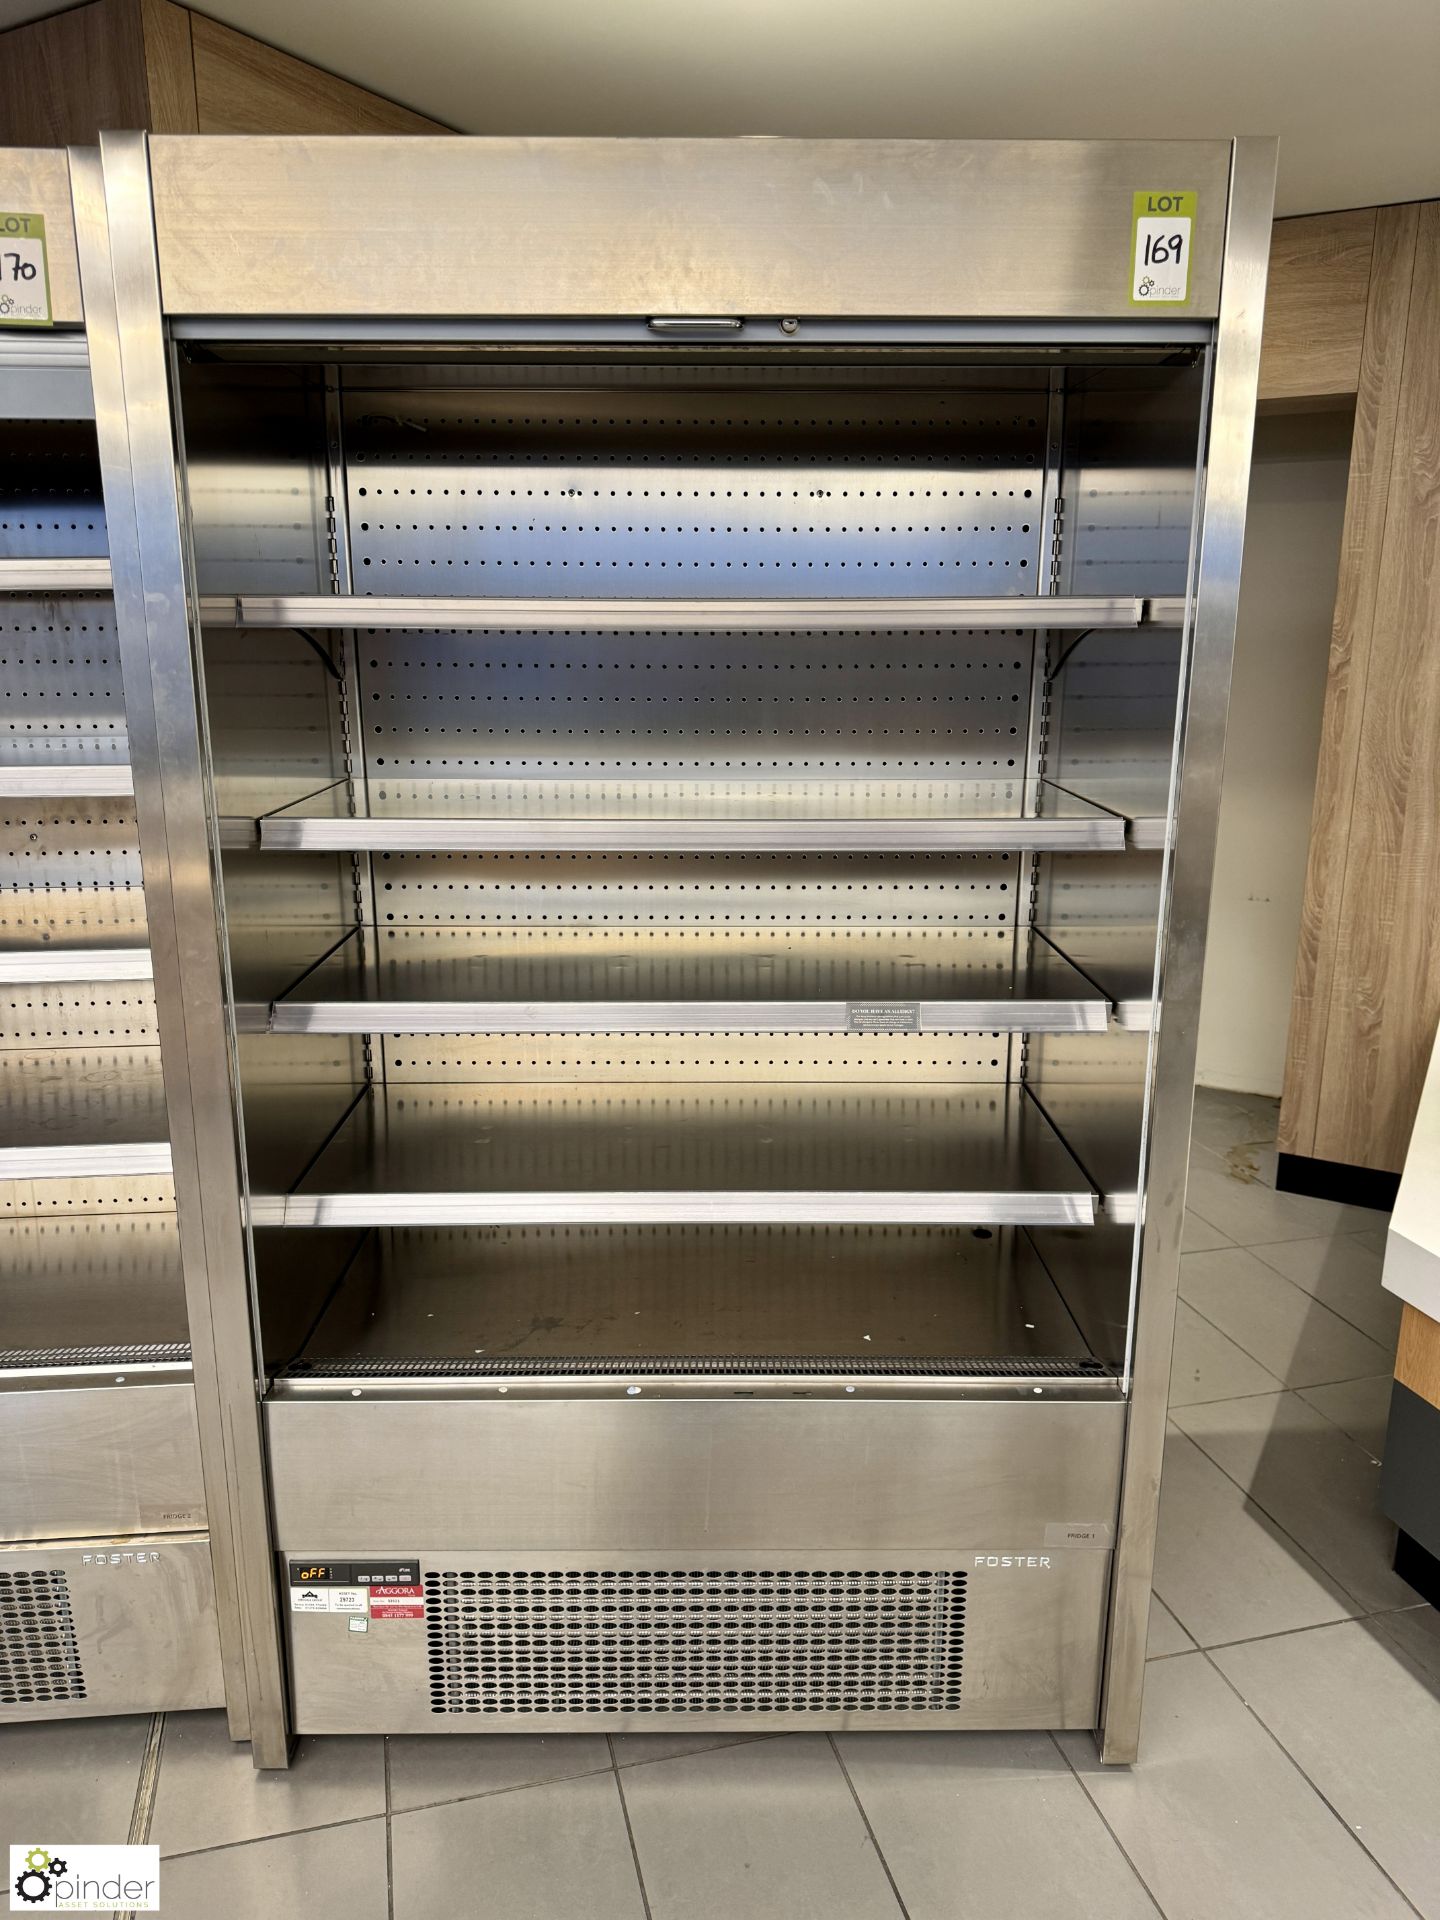 Foster stainless steel shutter front Chilled Display Unit, 240volts, 1200mm x 780mm x 2000mm (